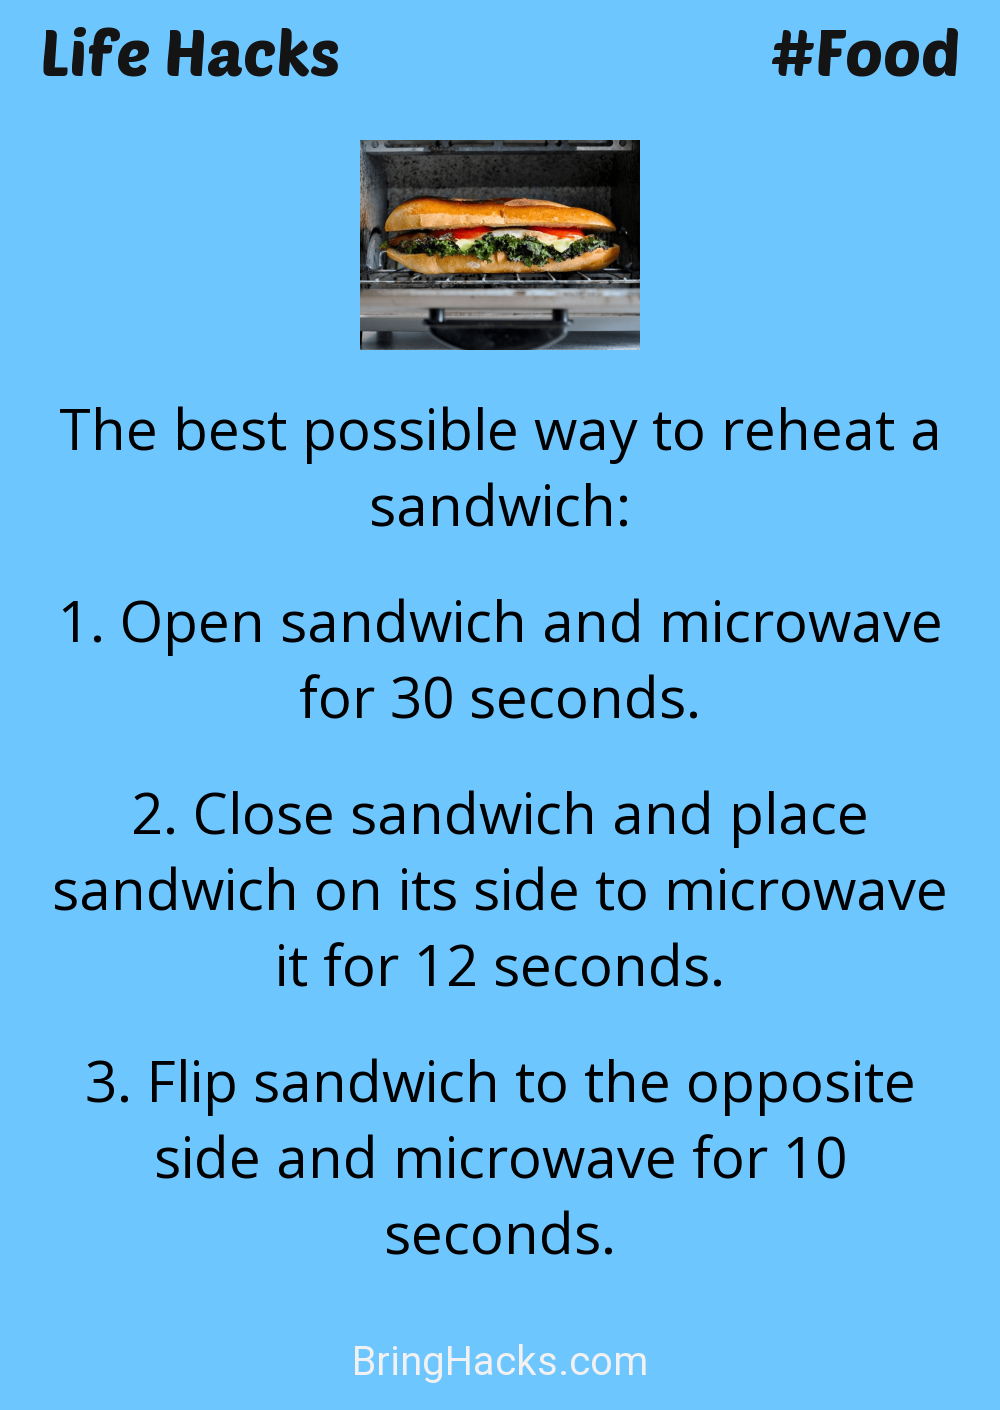 Life Hacks: - The best possible way to reheat a sandwich:
Open sandwich and microwave for 30 seconds. Close sandwich and place sandwich on its side to microwave it for 12 seconds. Flip sandwich to the opposite side and microwave for 10 seconds.